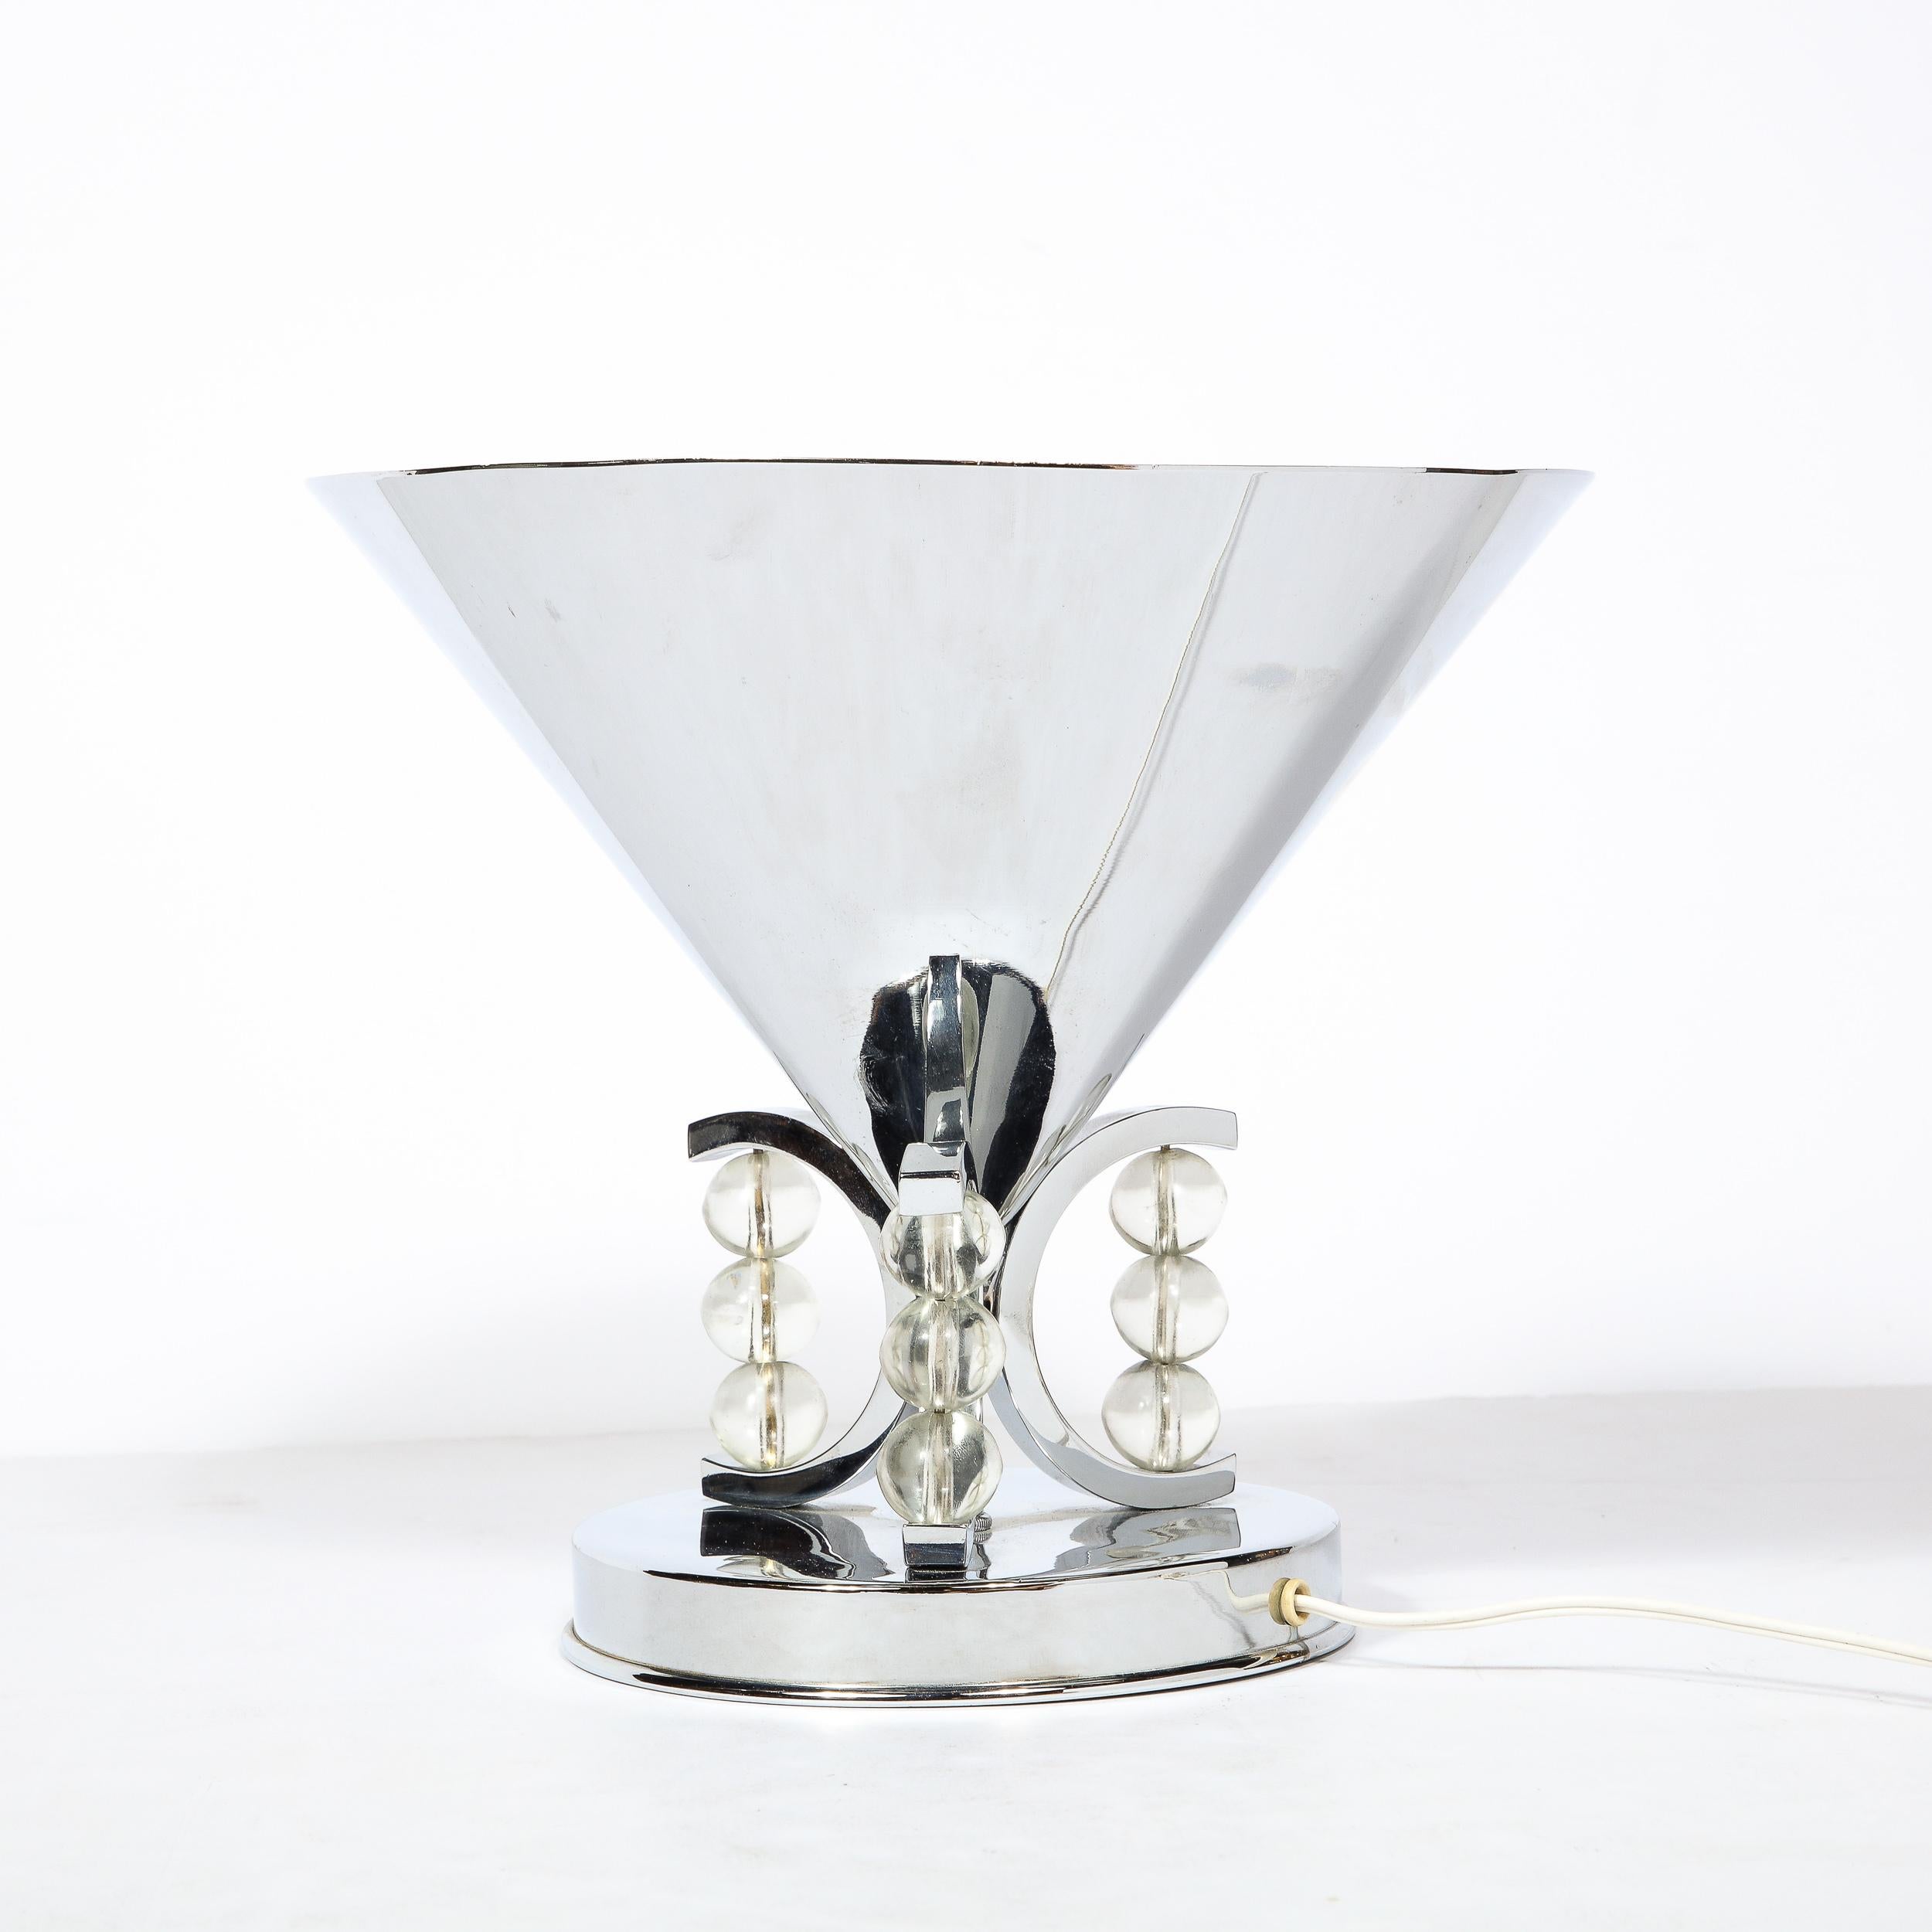 Art Deco Conical Uplight Table Lamp in Chrome with Stacked Glass Ball Detailing For Sale 1